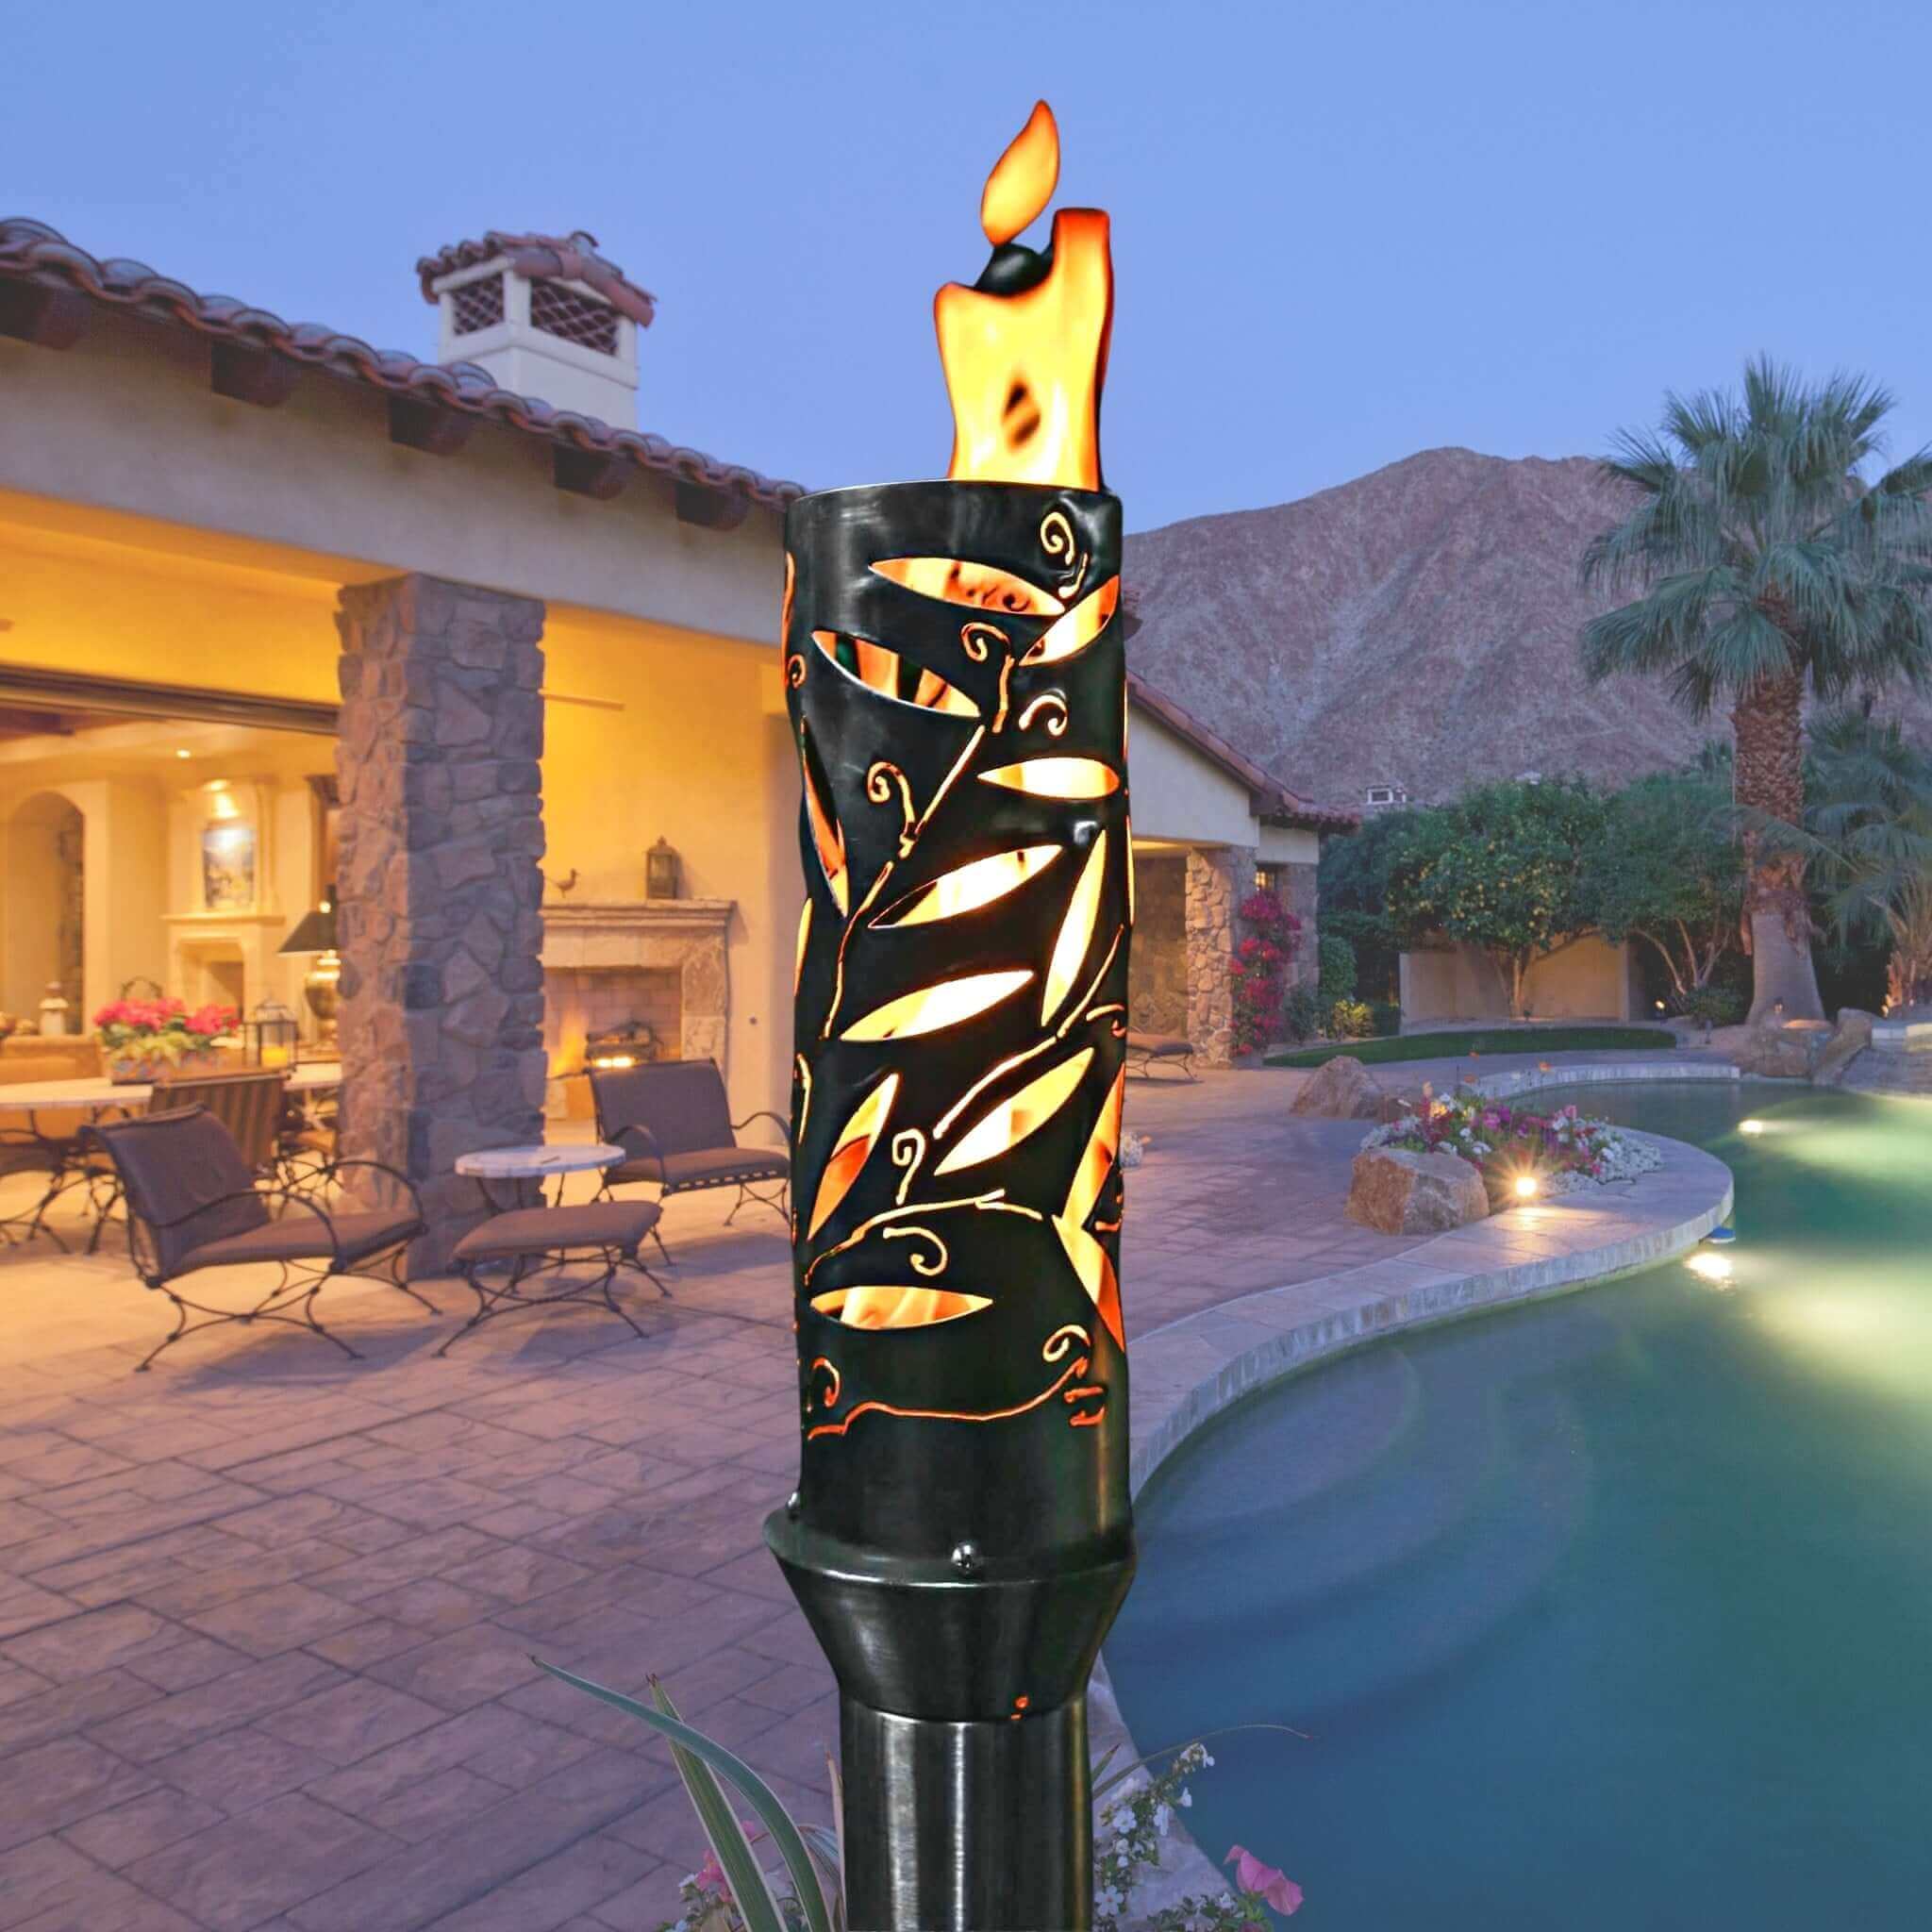 Havana Fire Torch COMPLETE KIT - Stainless Steel - The Outdoor Plus